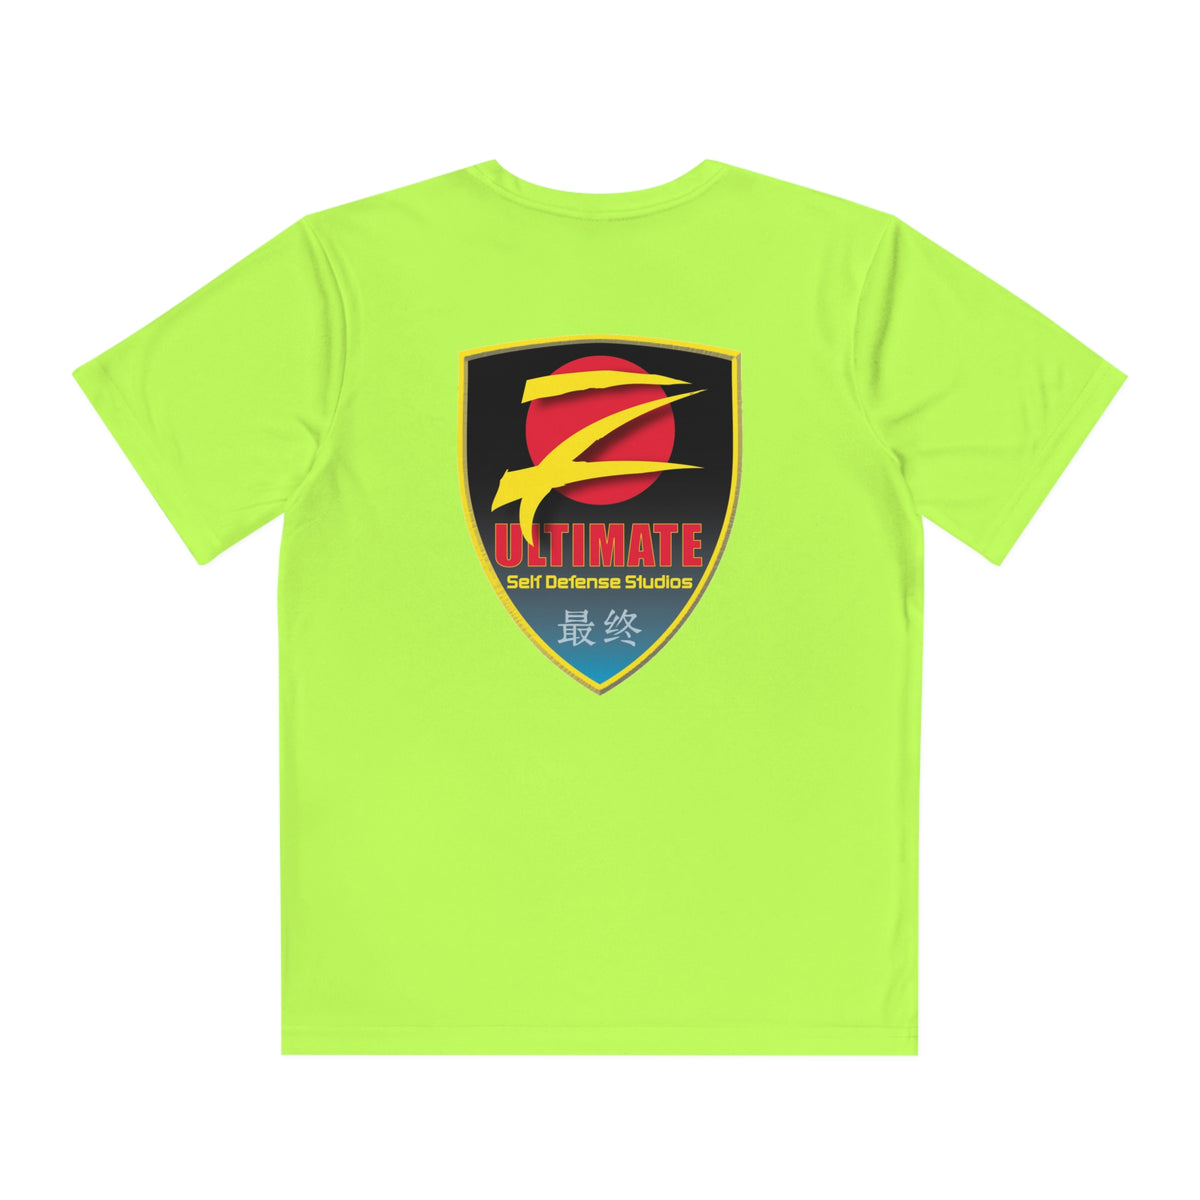 Z-Ultimate Youth T-Shirt